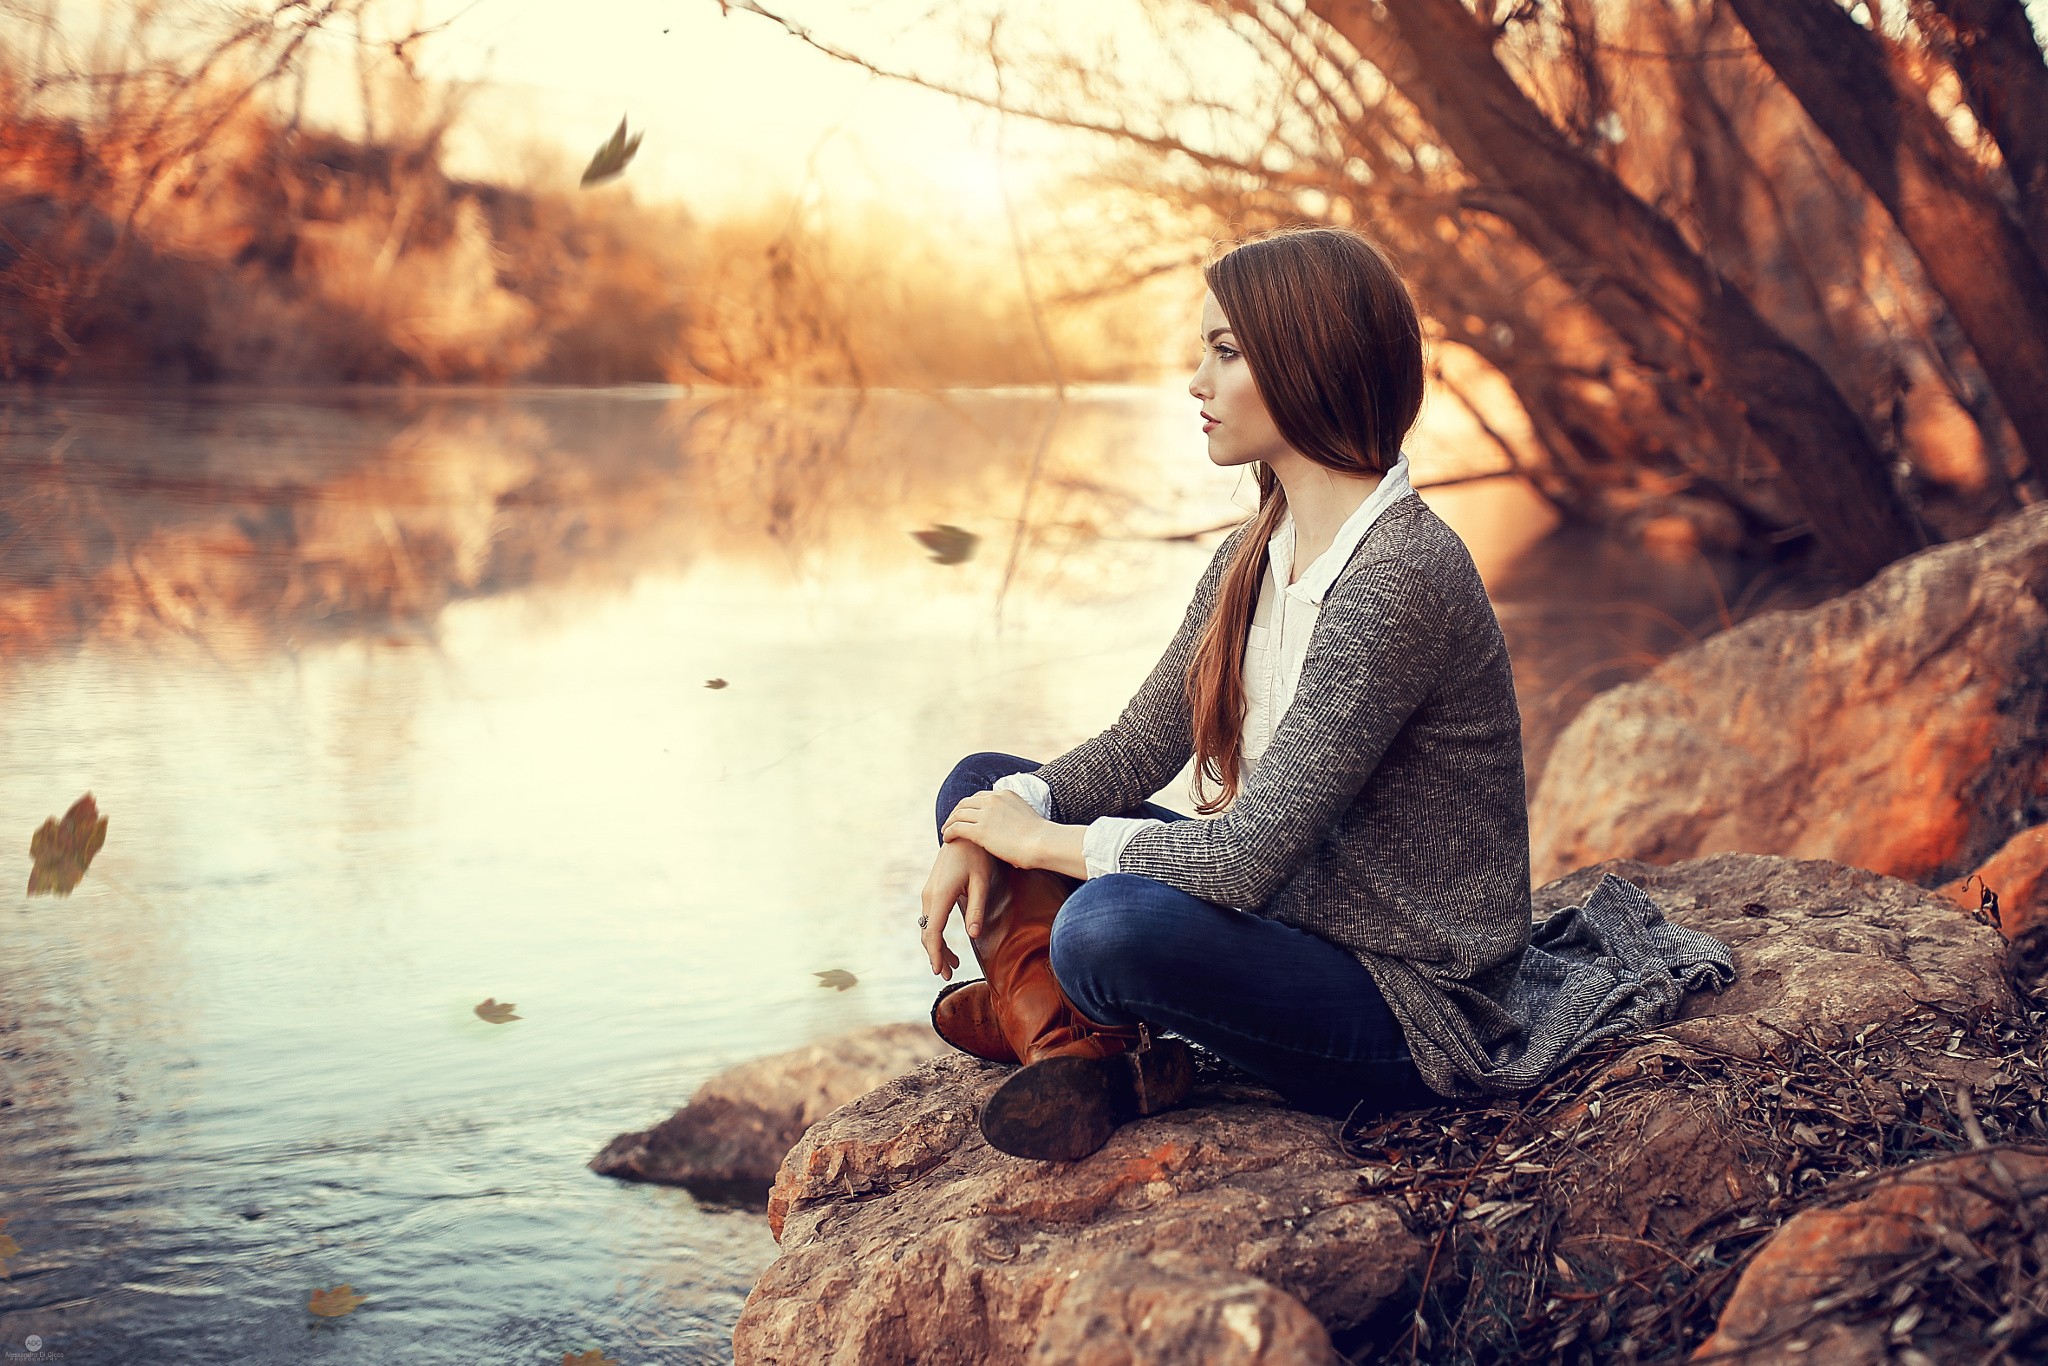 People 2048x1366 women Alessandro Di Cicco redhead fall women outdoors depth of field looking away straight hair sweater model sitting river April Slough riverside legs crossed profile outdoors face nature